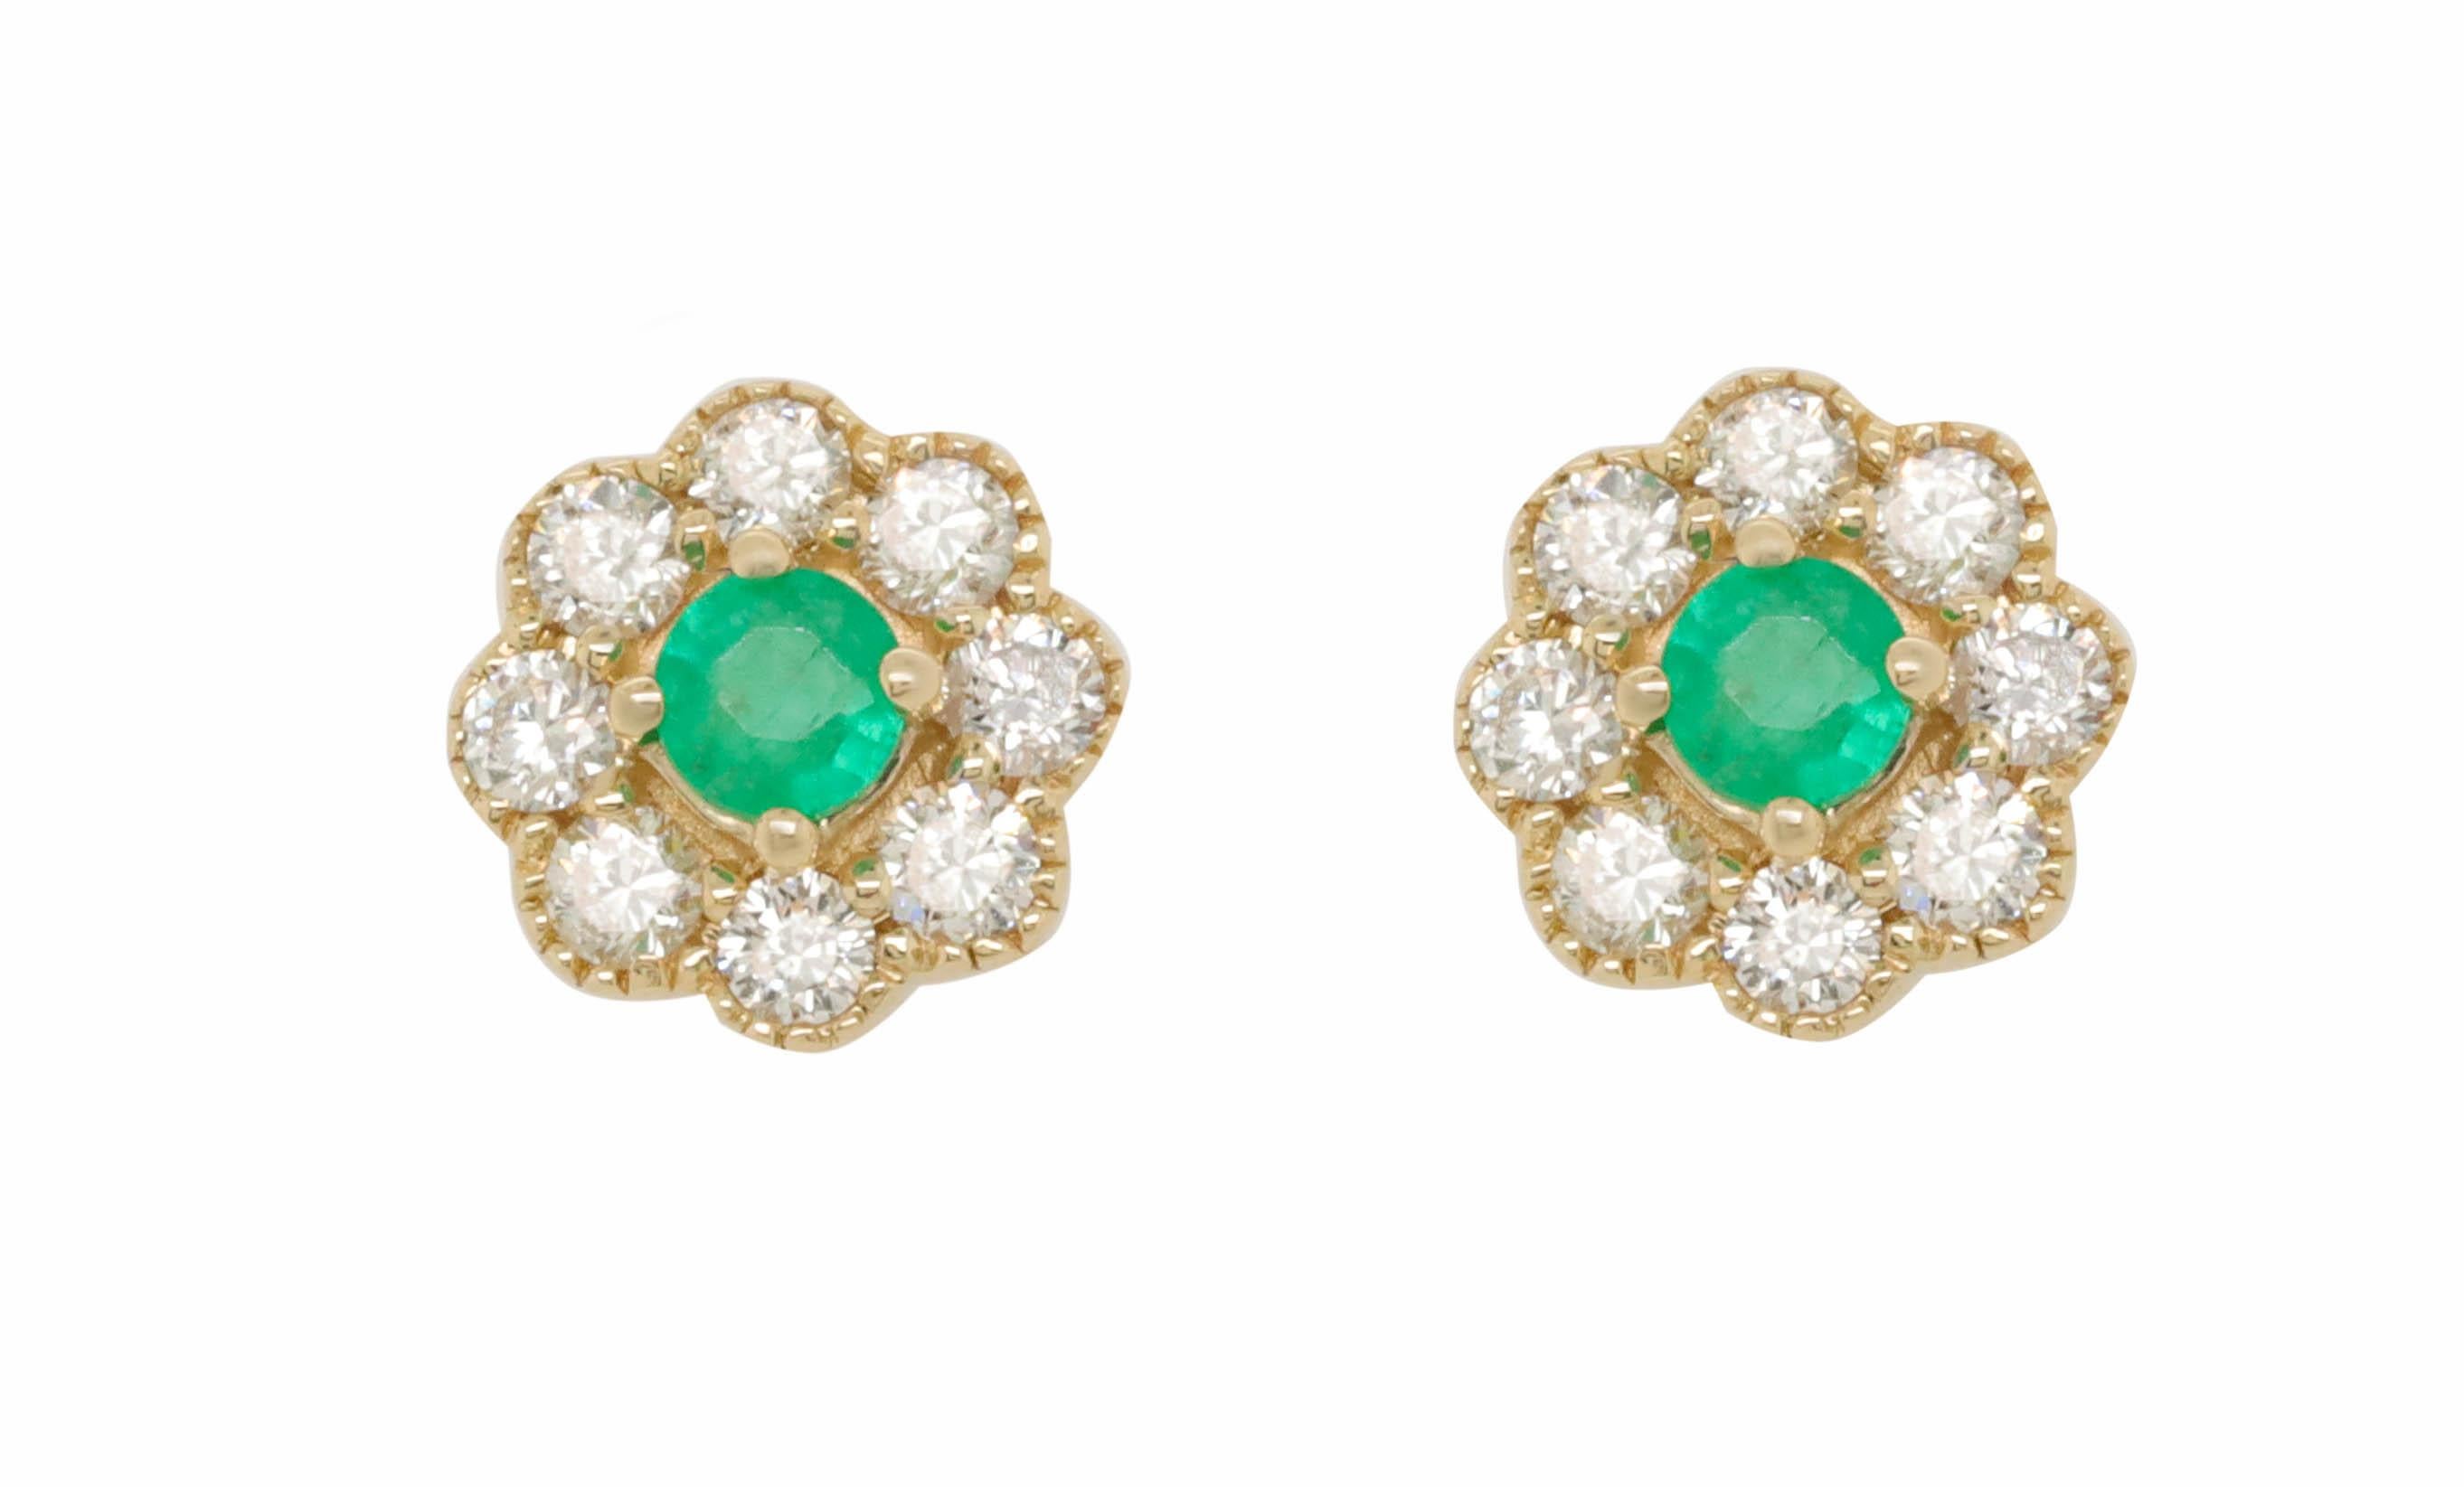 14K Yellow Gold Emerald and Diamond Earrings featuring 0.20 Carat T.W. of Natural Green Emeralds and 0.43 Carats T.W. of Diamonds

Underline your look with this sharp 14K Yellow Gold Diamond and Emerald Earrings. High quality Diamonds and emeralds.